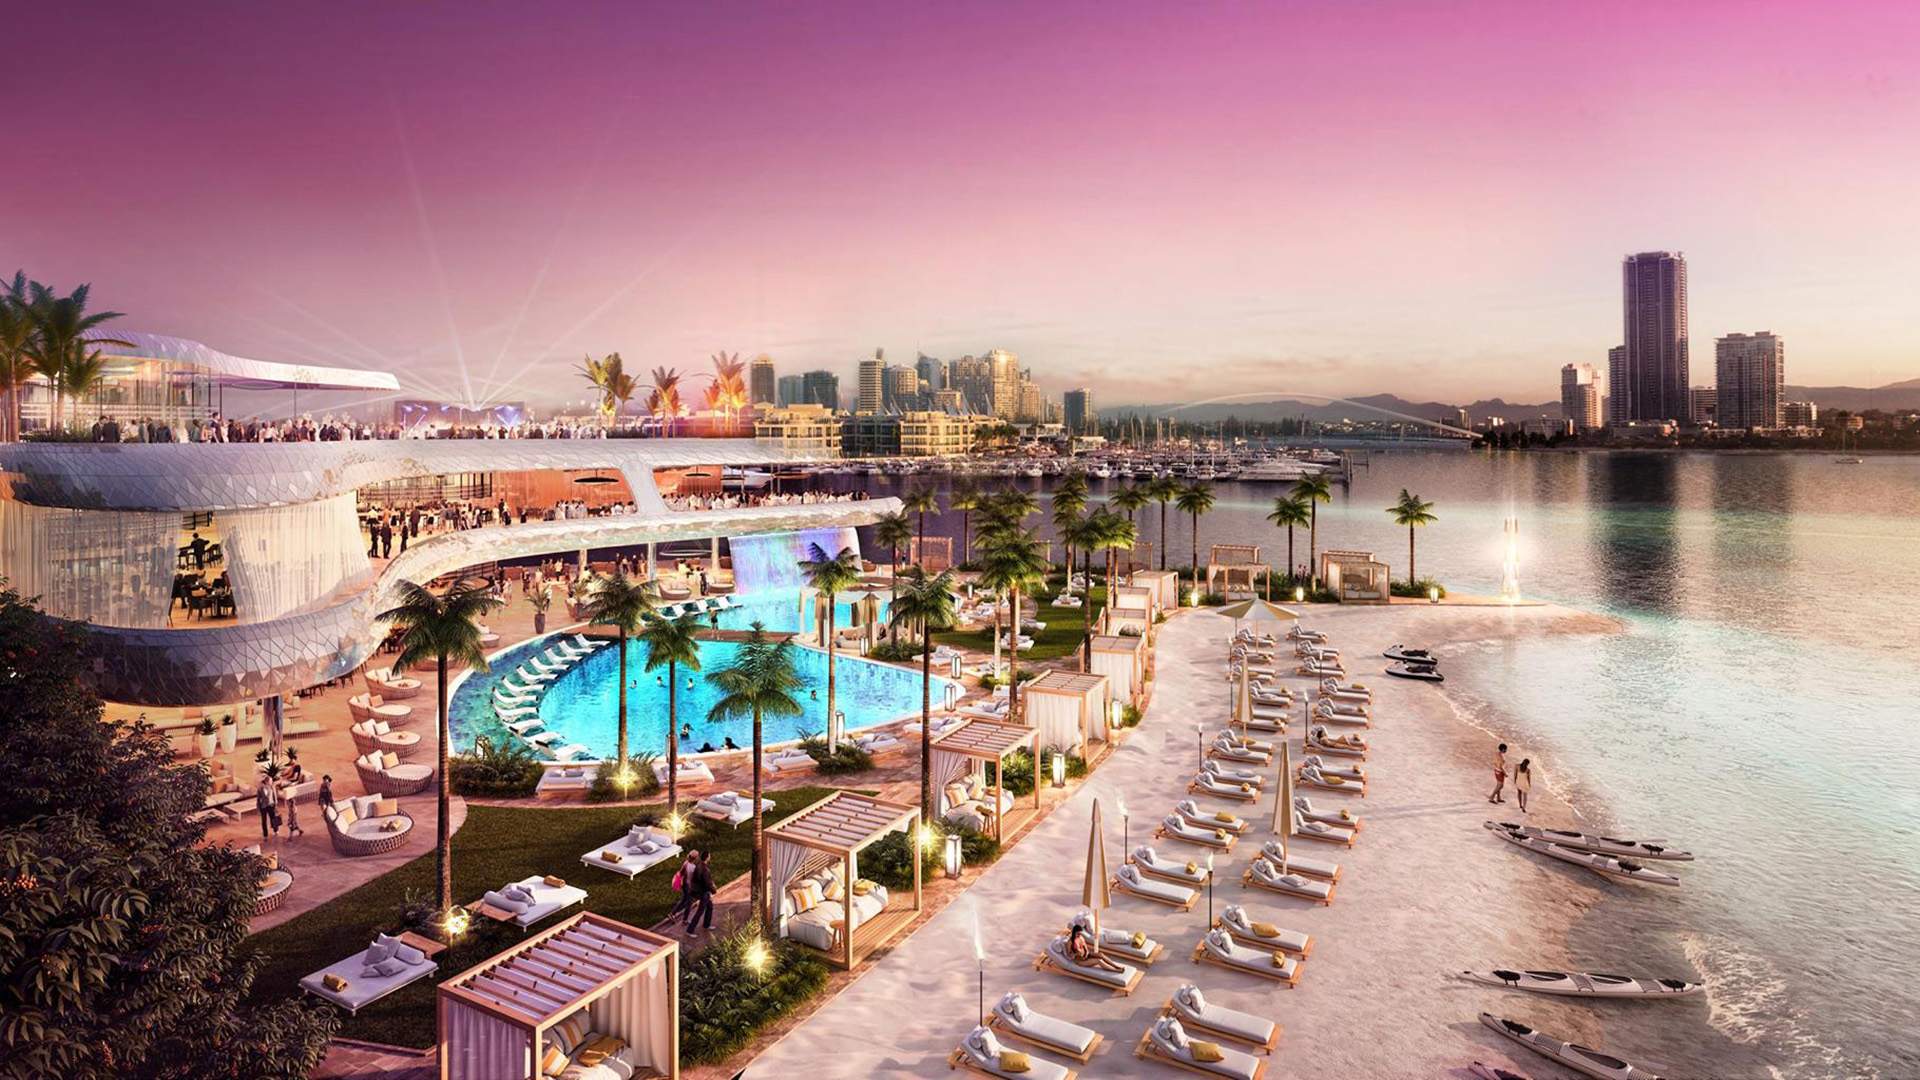 The Gold Coast Might Be Getting a Characteristically Over-the-Top New Beach Club